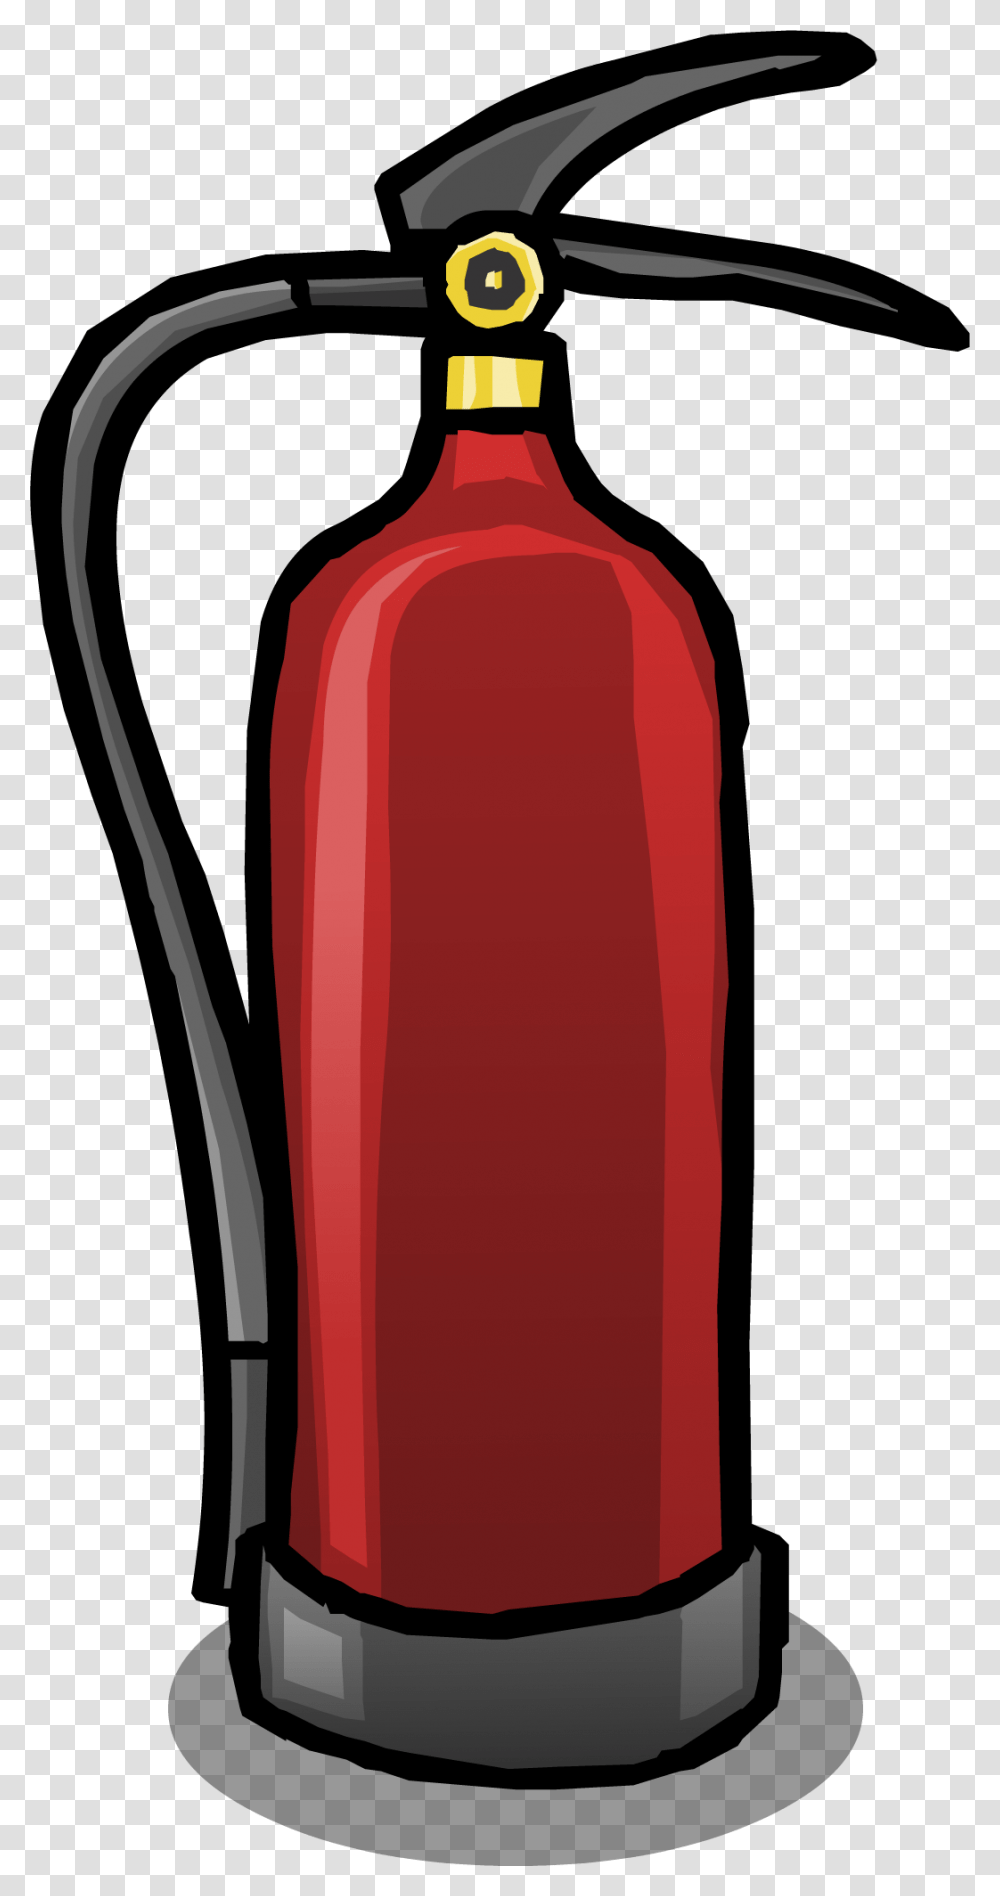 Fire Extinguisher Sprite, Appliance, Ketchup, Food, Vacuum Cleaner Transparent Png